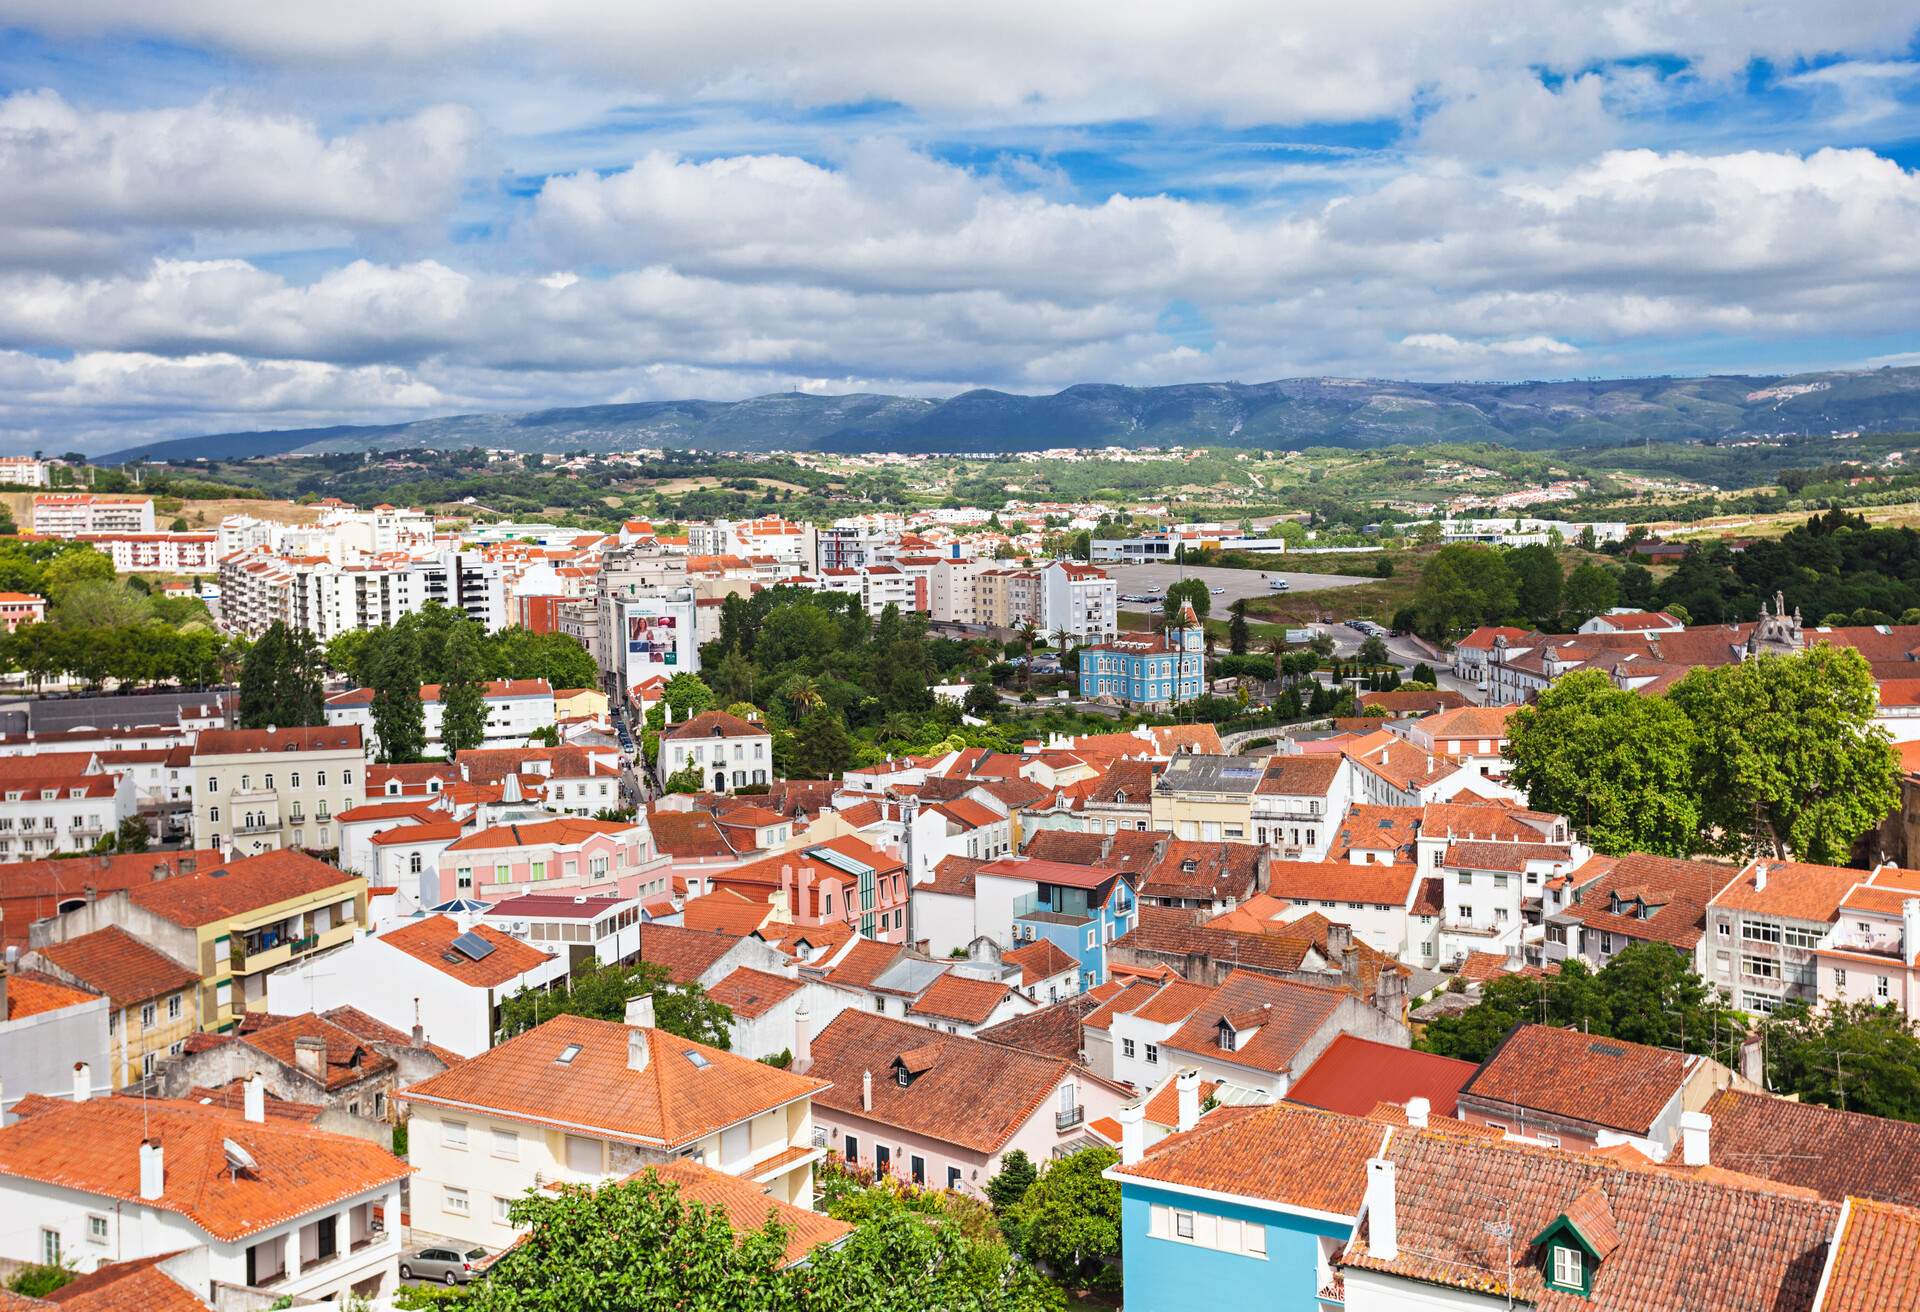 Aerial view of Alcobasa town, Oeste Subregion of Portugal